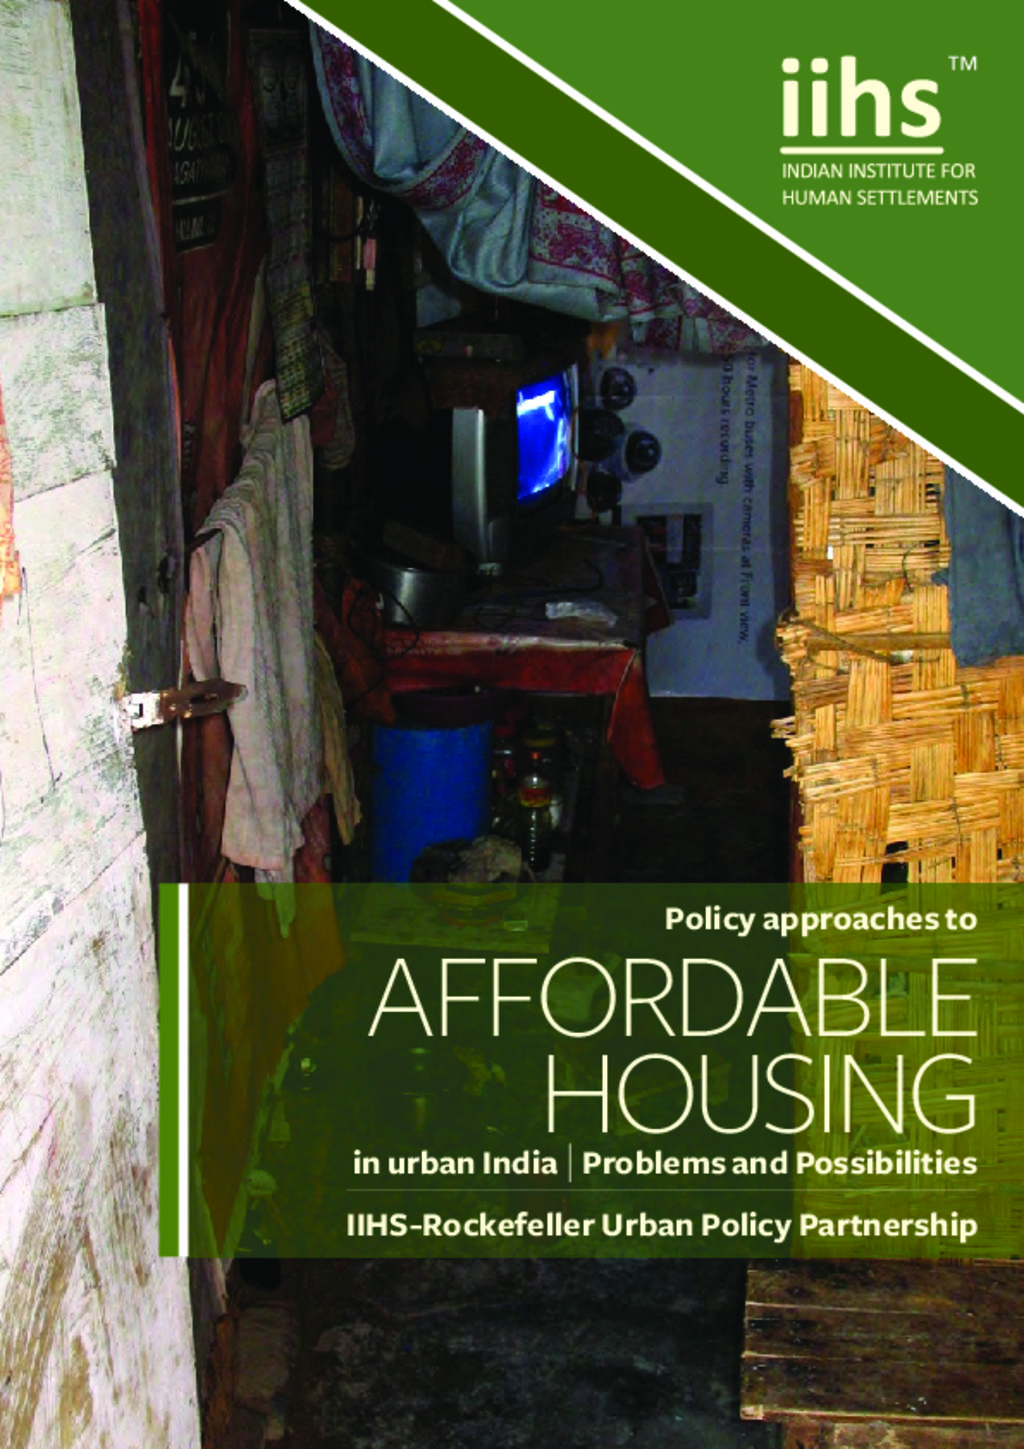 Policy Approaches to Affordable Housing in Urban India - Problems and Possibilities